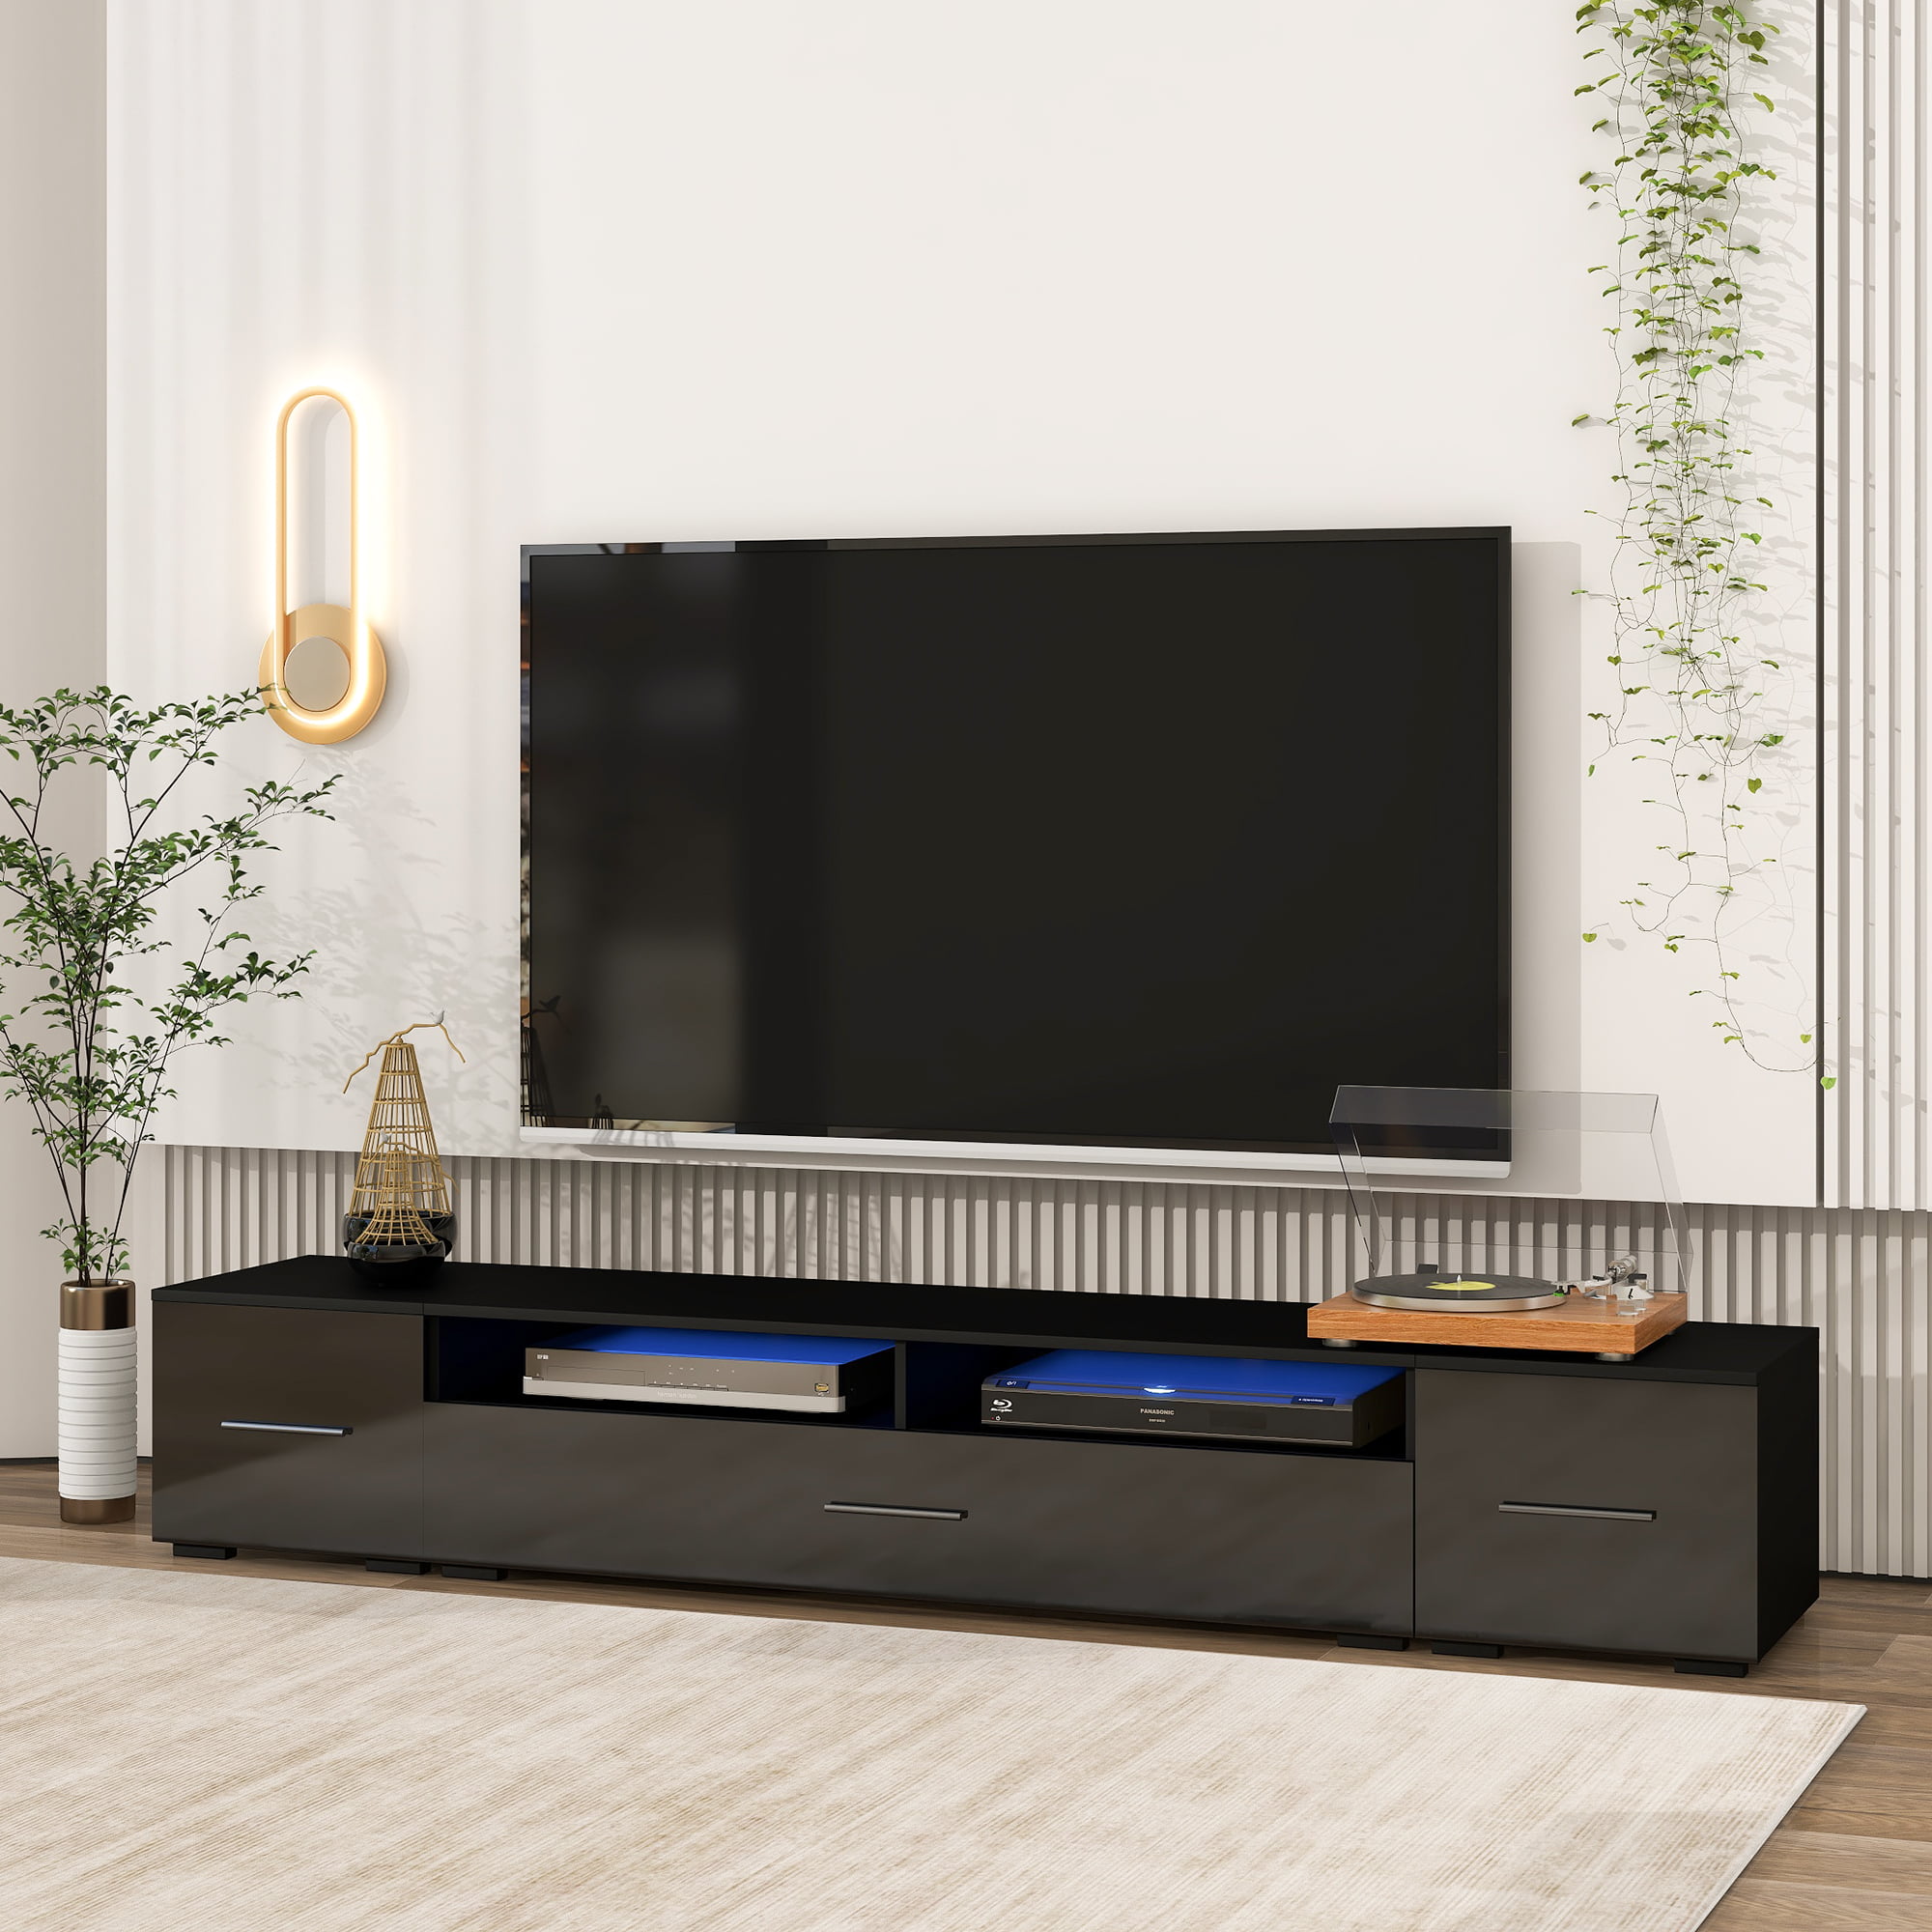 Minimalist Design TV Stand With Color Changing LED Lights - WF295802AAB